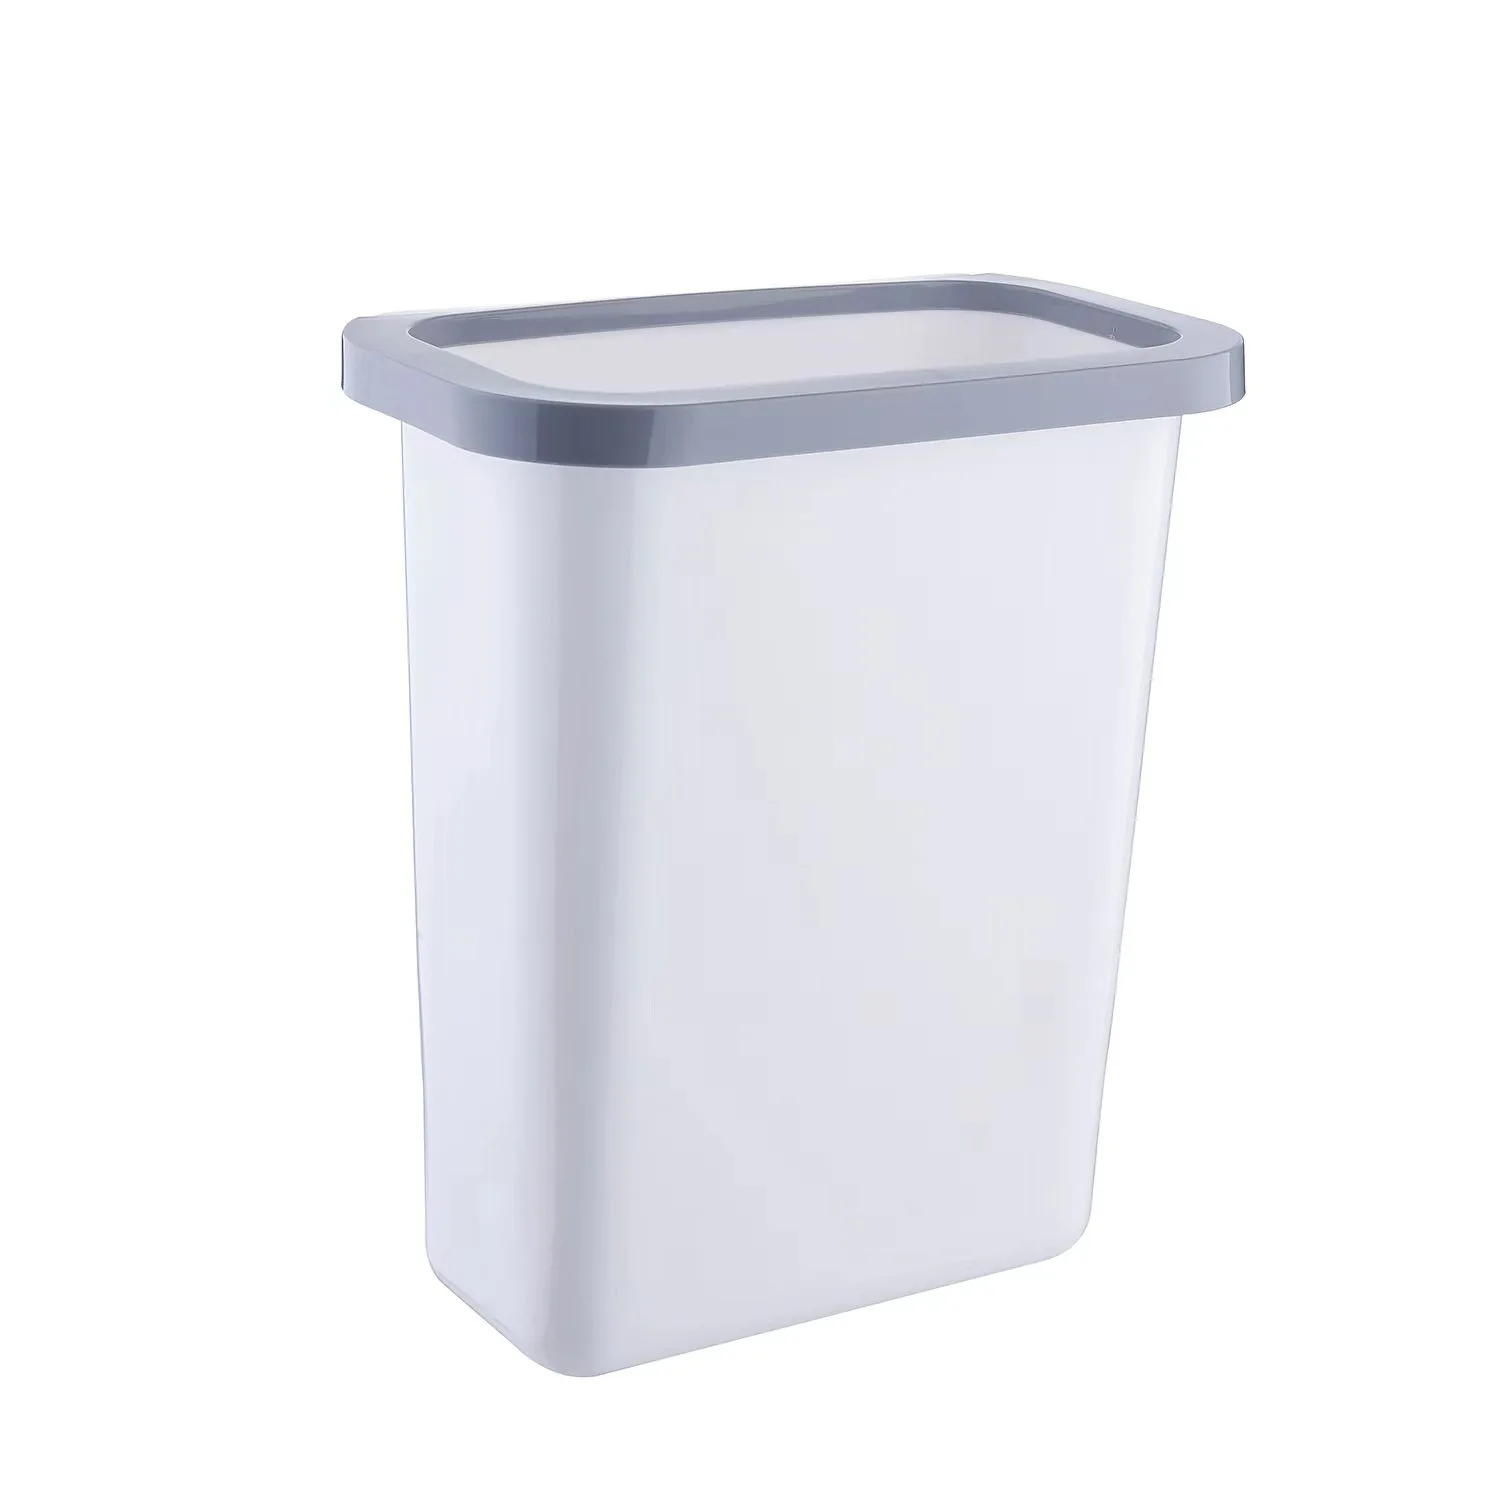 Plastic Hanging Waste Bin Trash Can Kitchen Wall Mounted 5 Litre Carton Dustbin Plastic Cans for Storage with Lid Folding